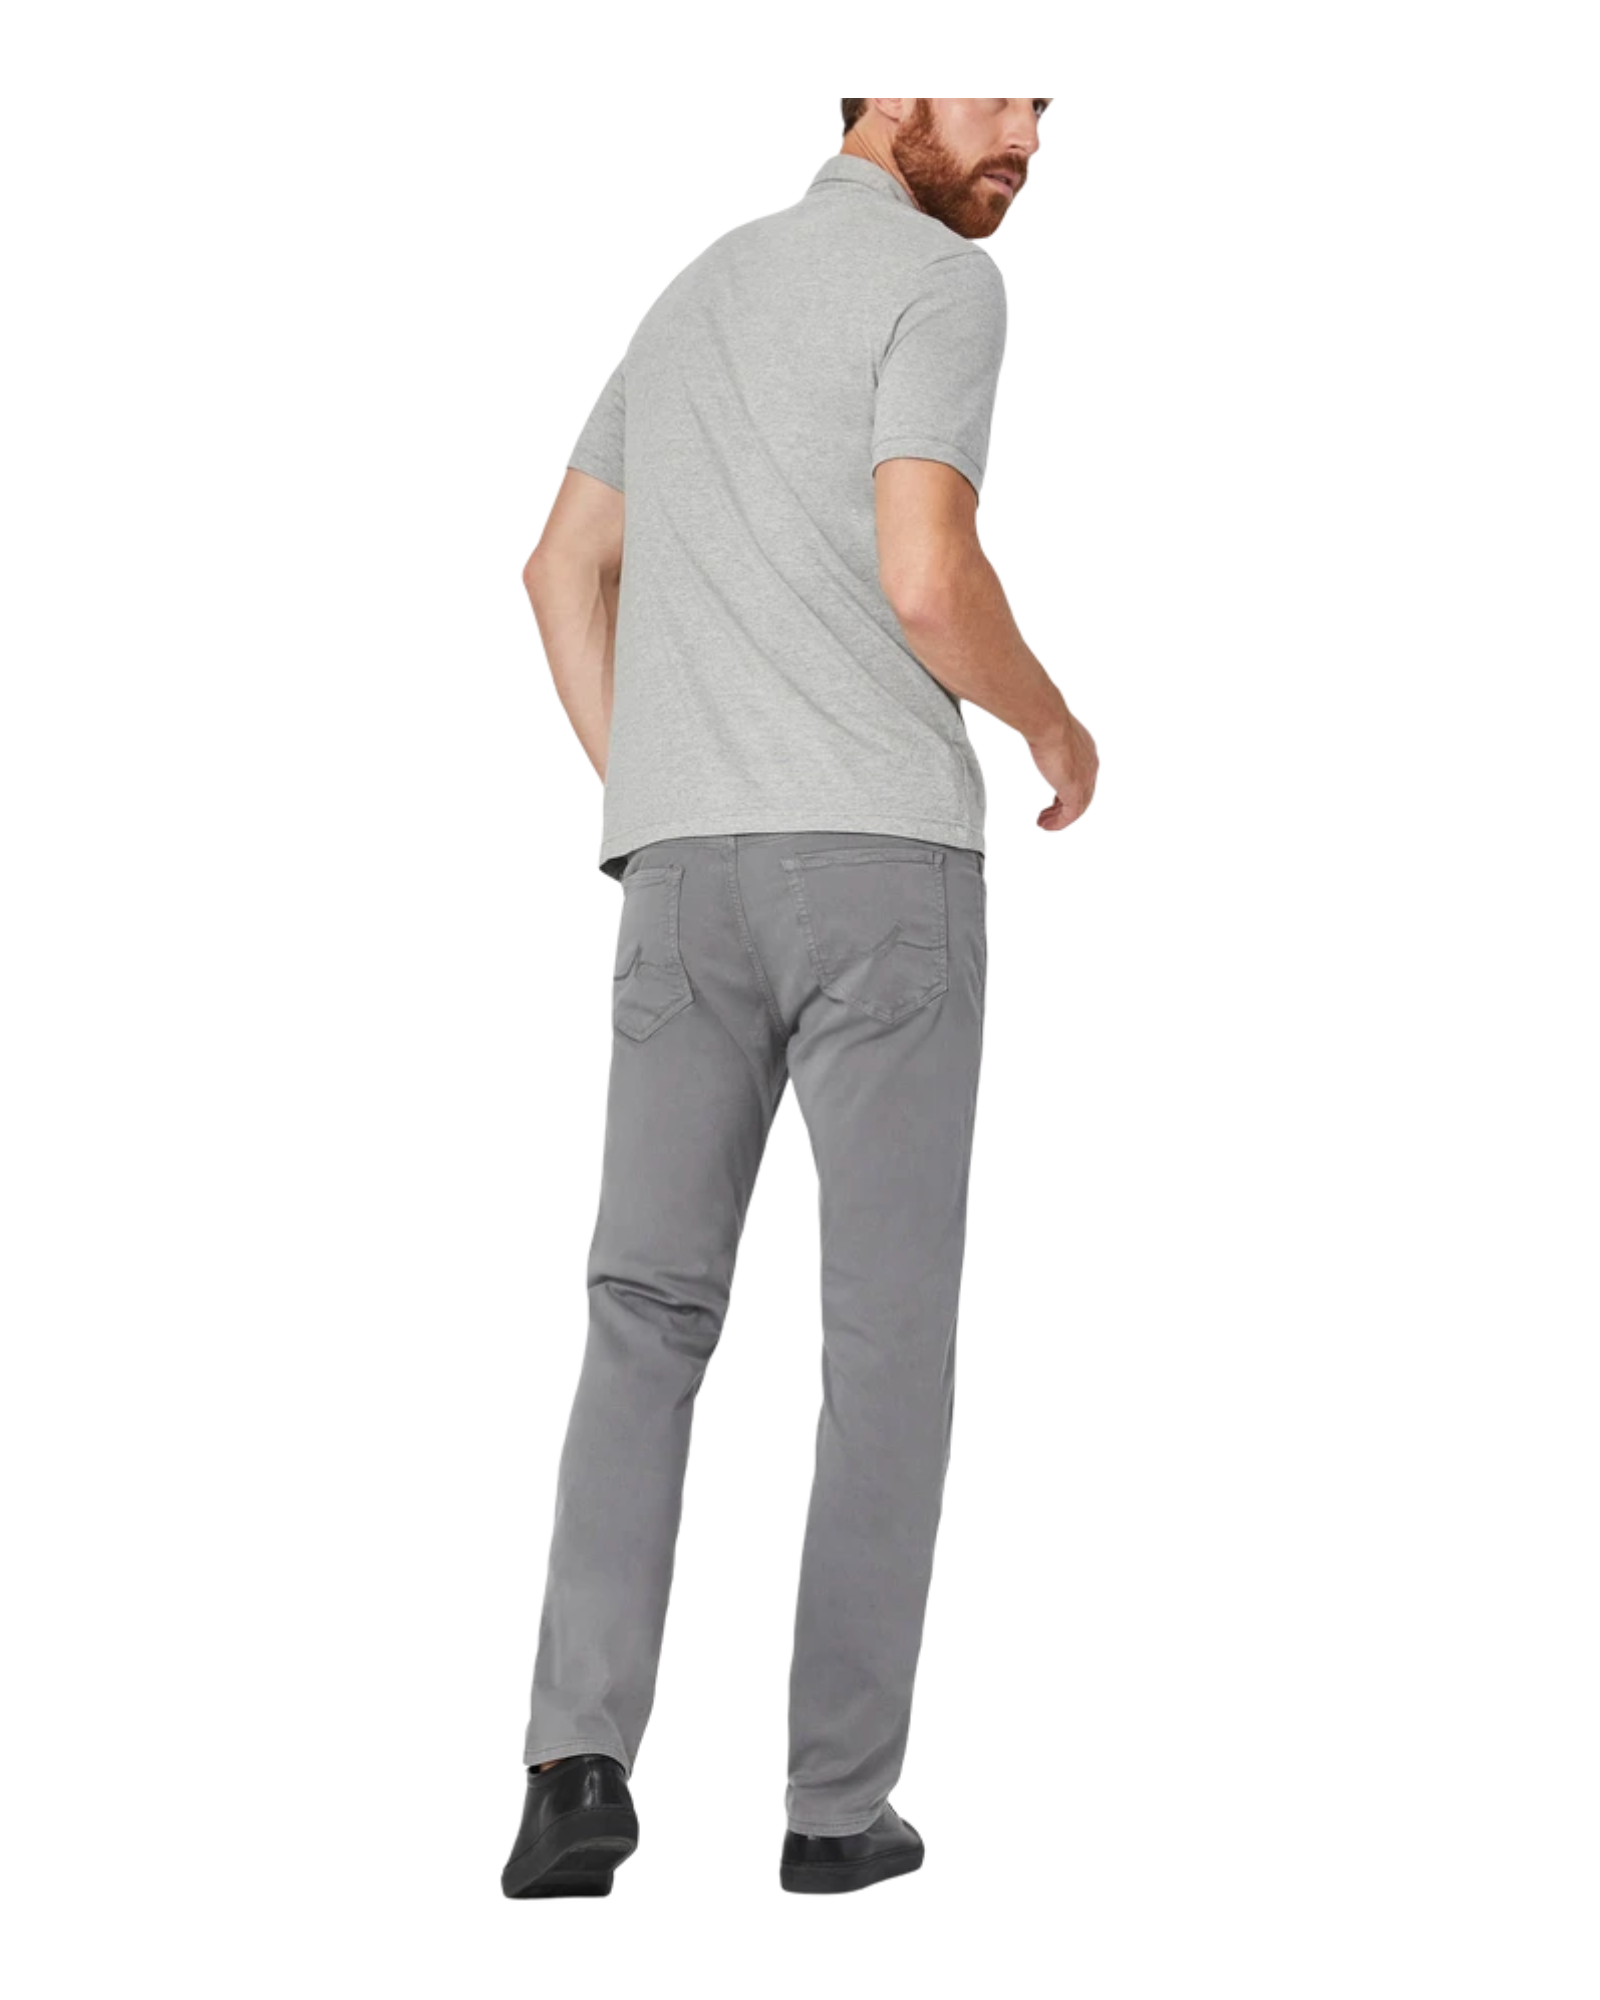 Our twill blended fabric has a supremely soft, velvety feel. This mid-rise pant has a slightly tapered leg for a contemporary straight fit.